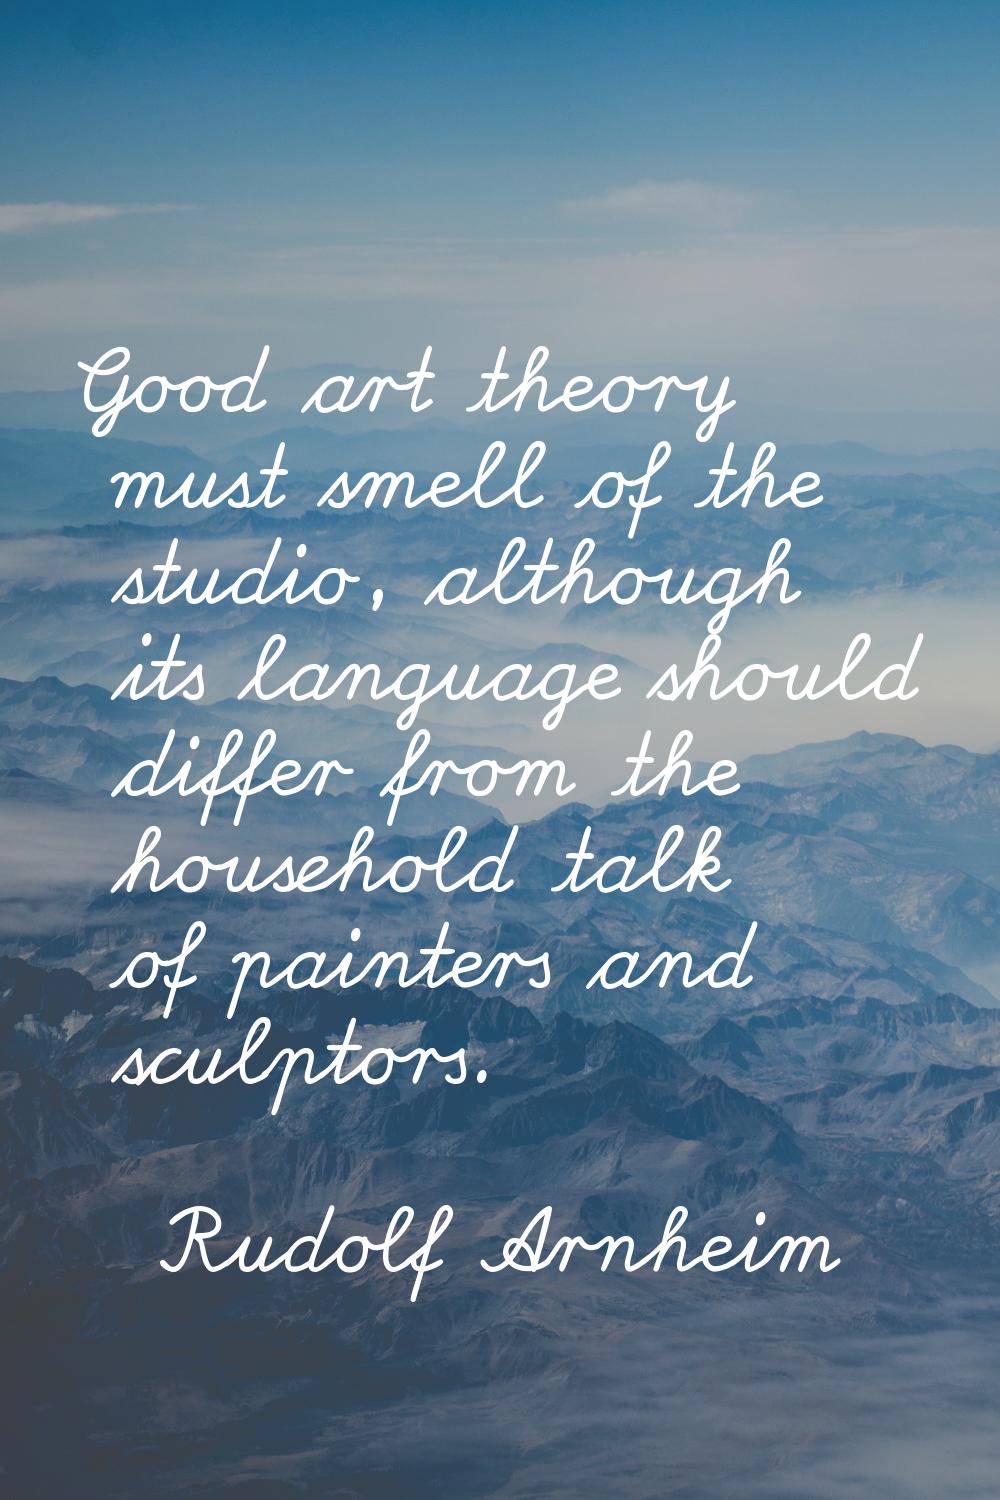 Good art theory must smell of the studio, although its language should differ from the household ta